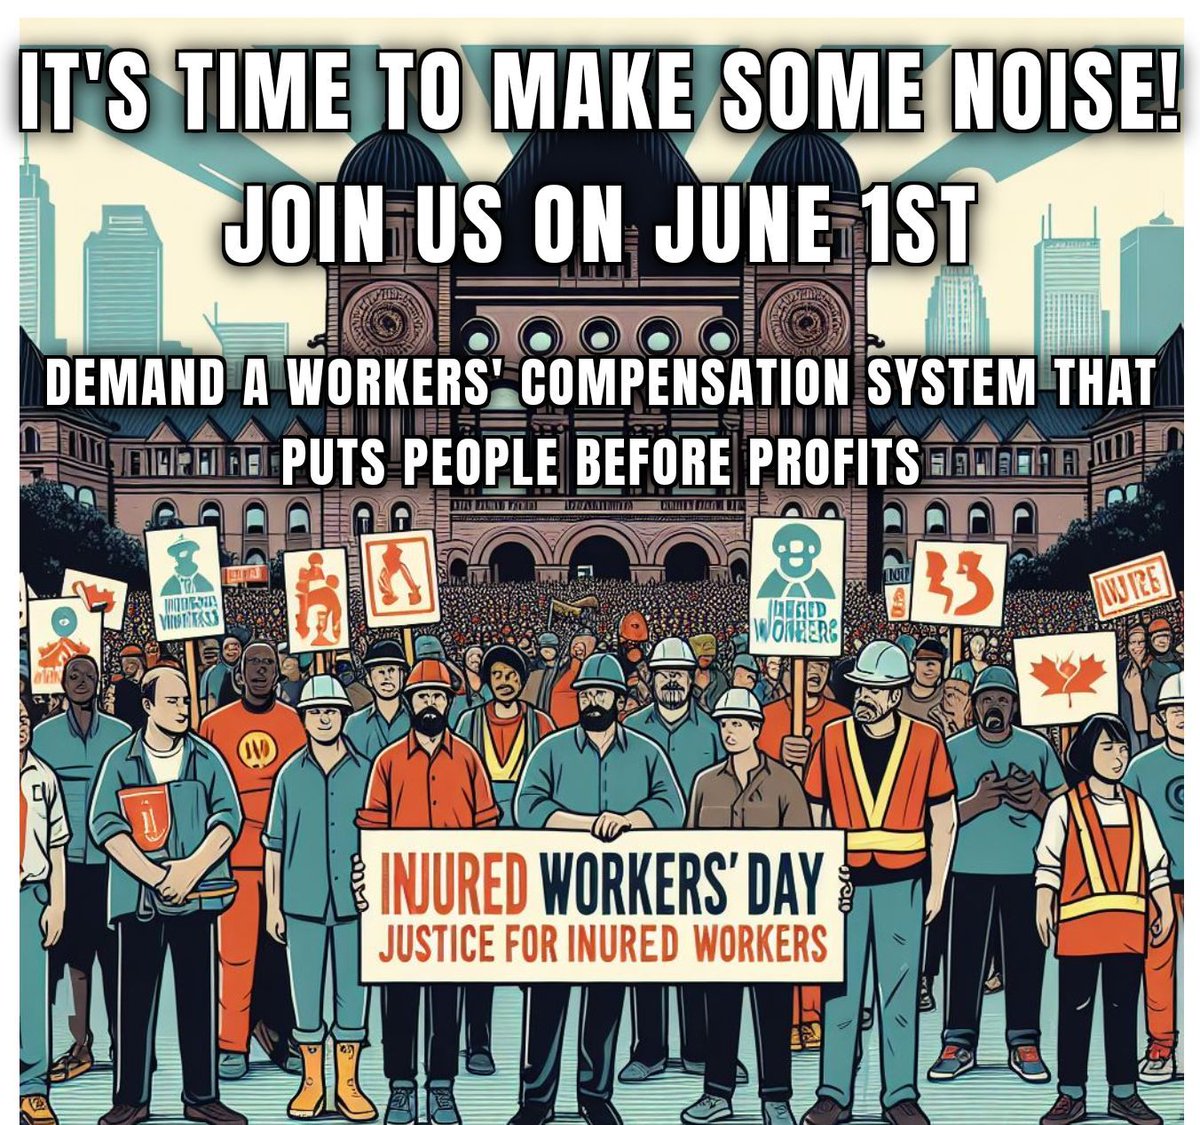 It's time to make some noise! Join us on June 1st for #InjuredWorkersDay and demand a workers' compensation system that puts people over profits. Together, we can create a fair and just system for all workers! ✊ #WorkersRights #Justice